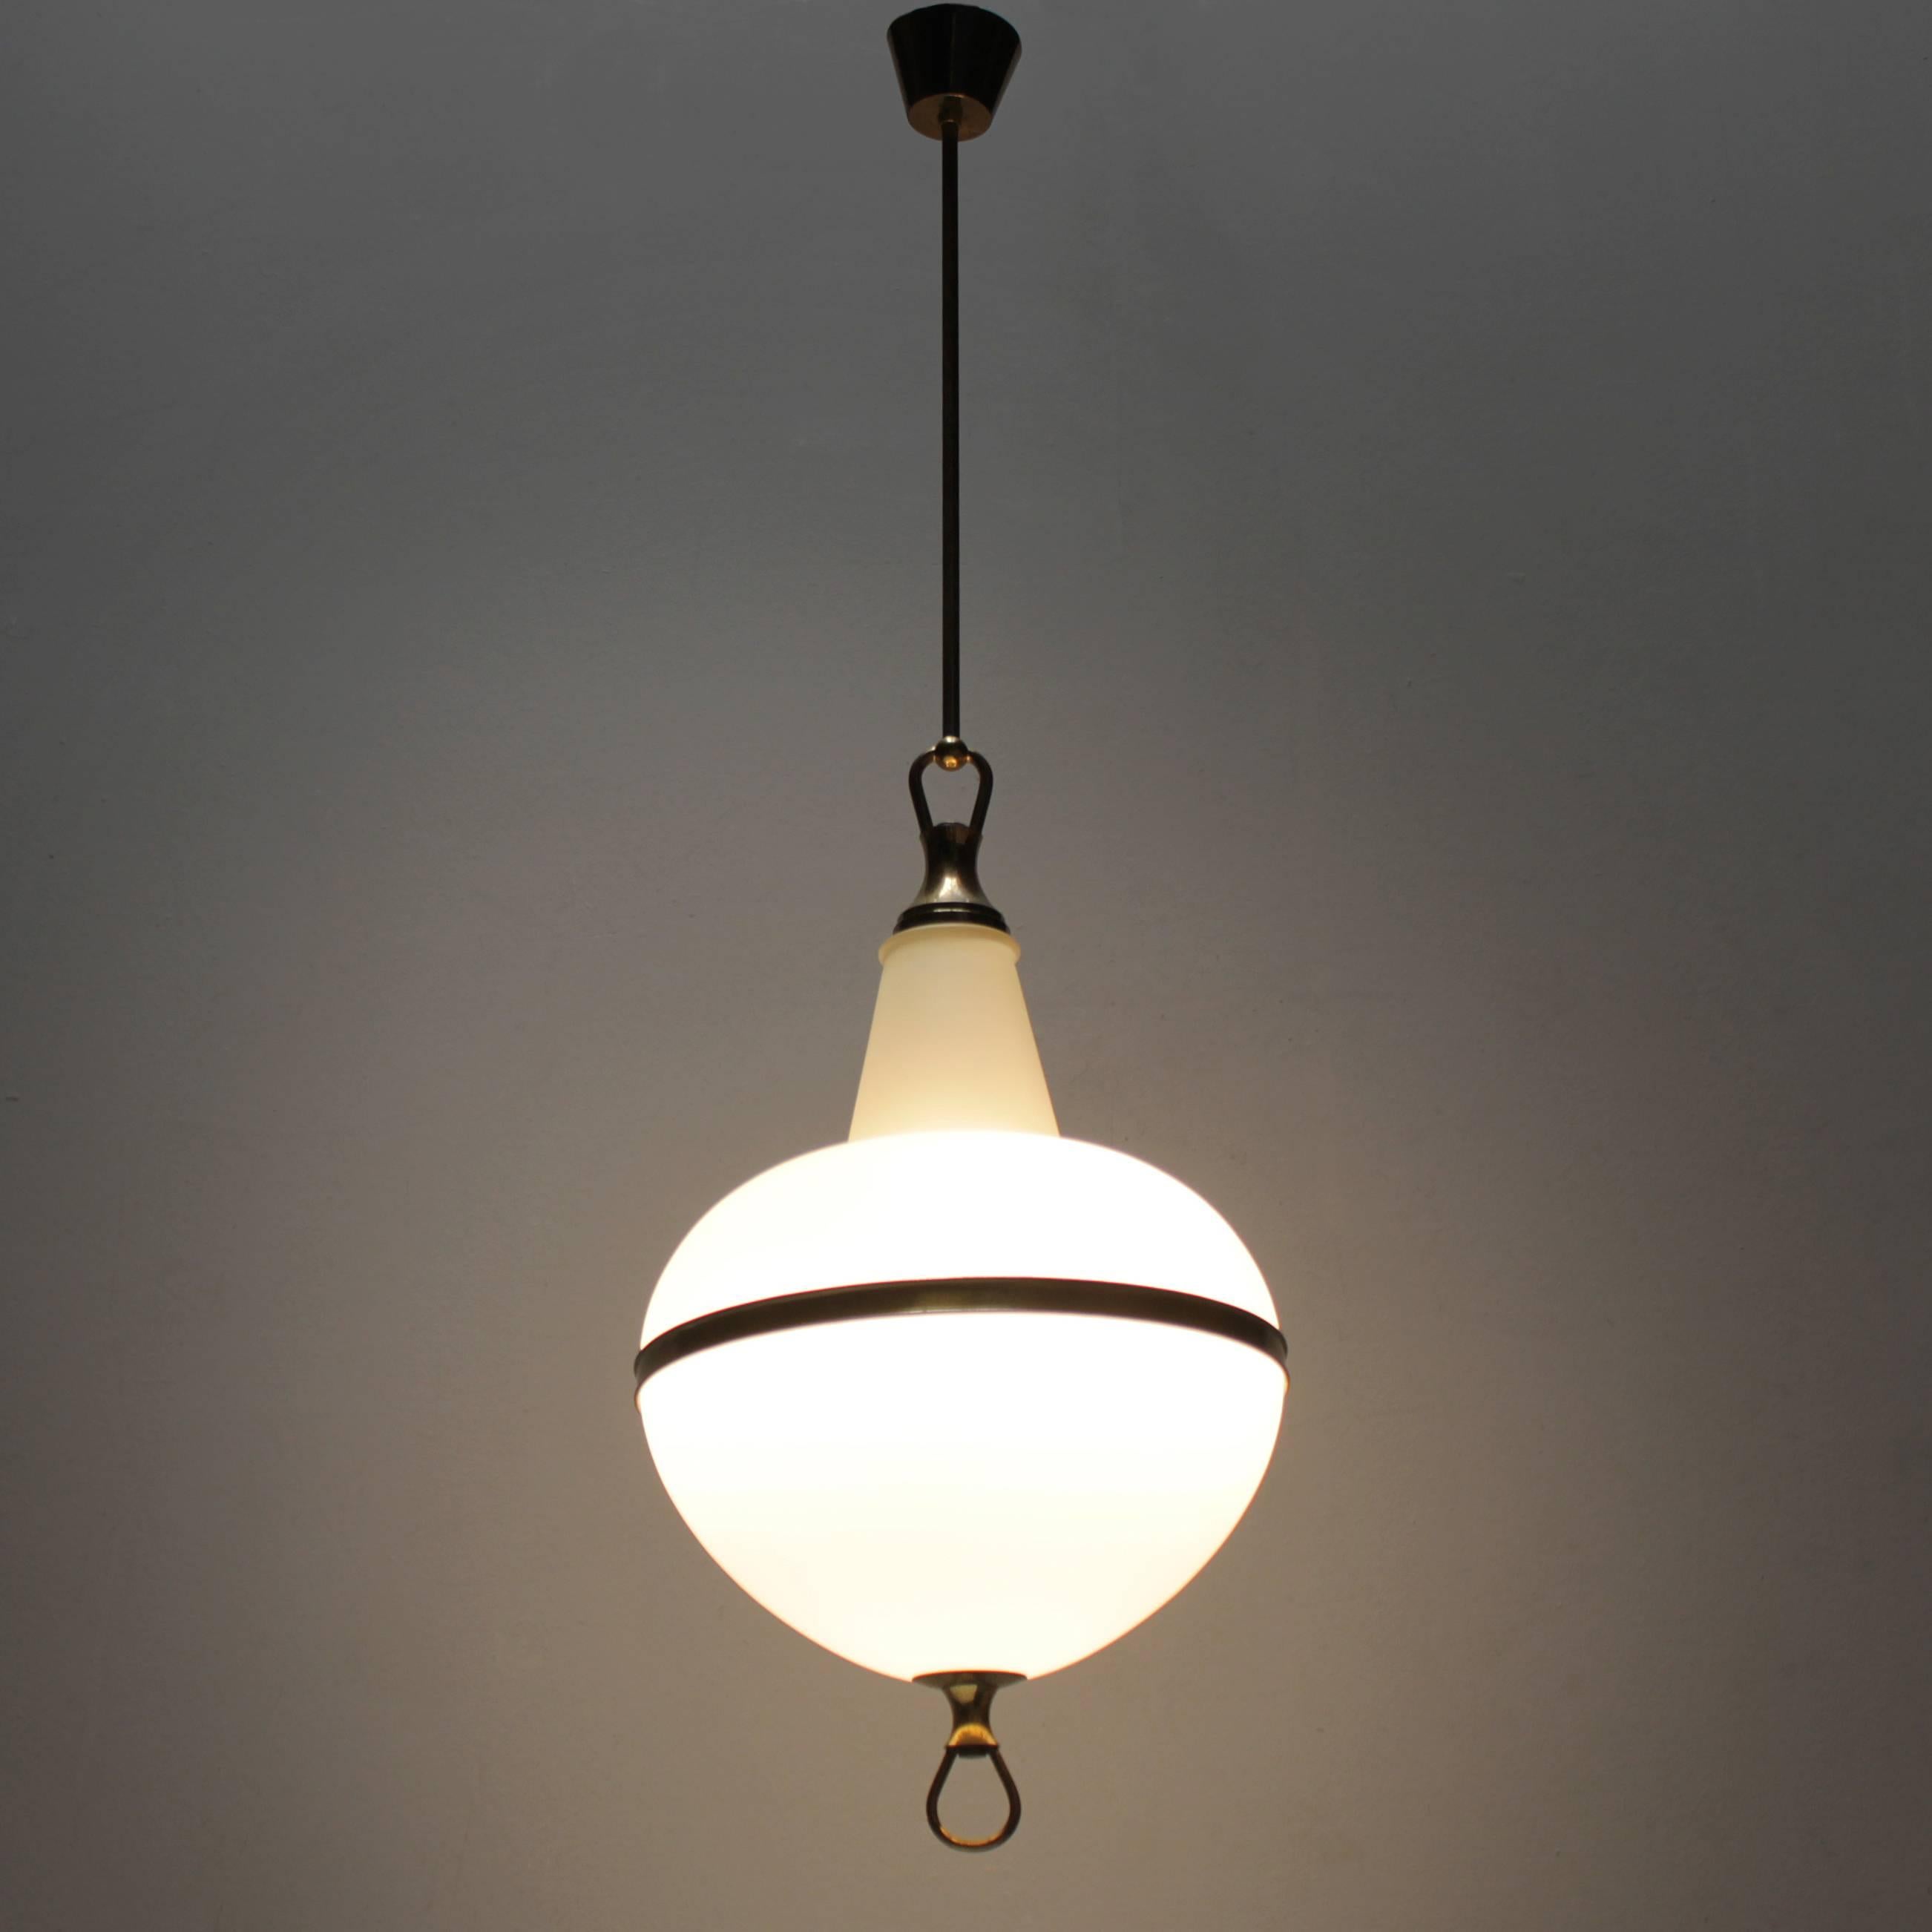 Impressive Italian lantern executed in white cased glass and fitted with high quality brass parts. This beautifully made pendant lamp holds three light bulbs.
Measures: Height from ceiling till drop 45.3 in. (115 cm), diameter 13.6 in. (34.5 cm),